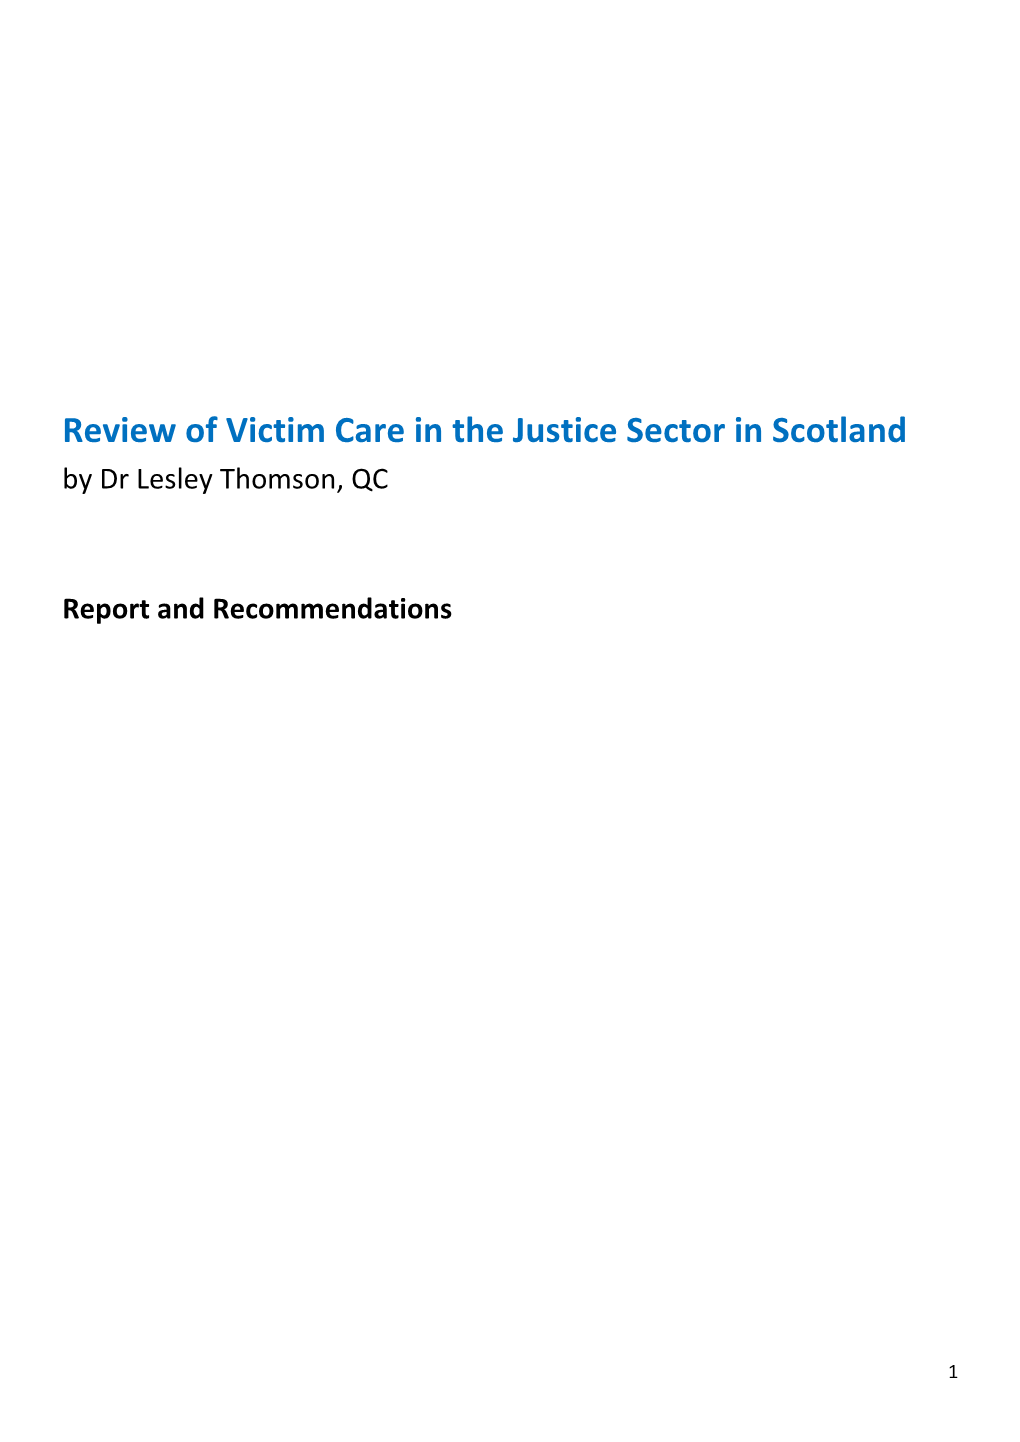 Review of Victim Care in the Justice Sector in Scotland by Dr Lesley Thomson, QC